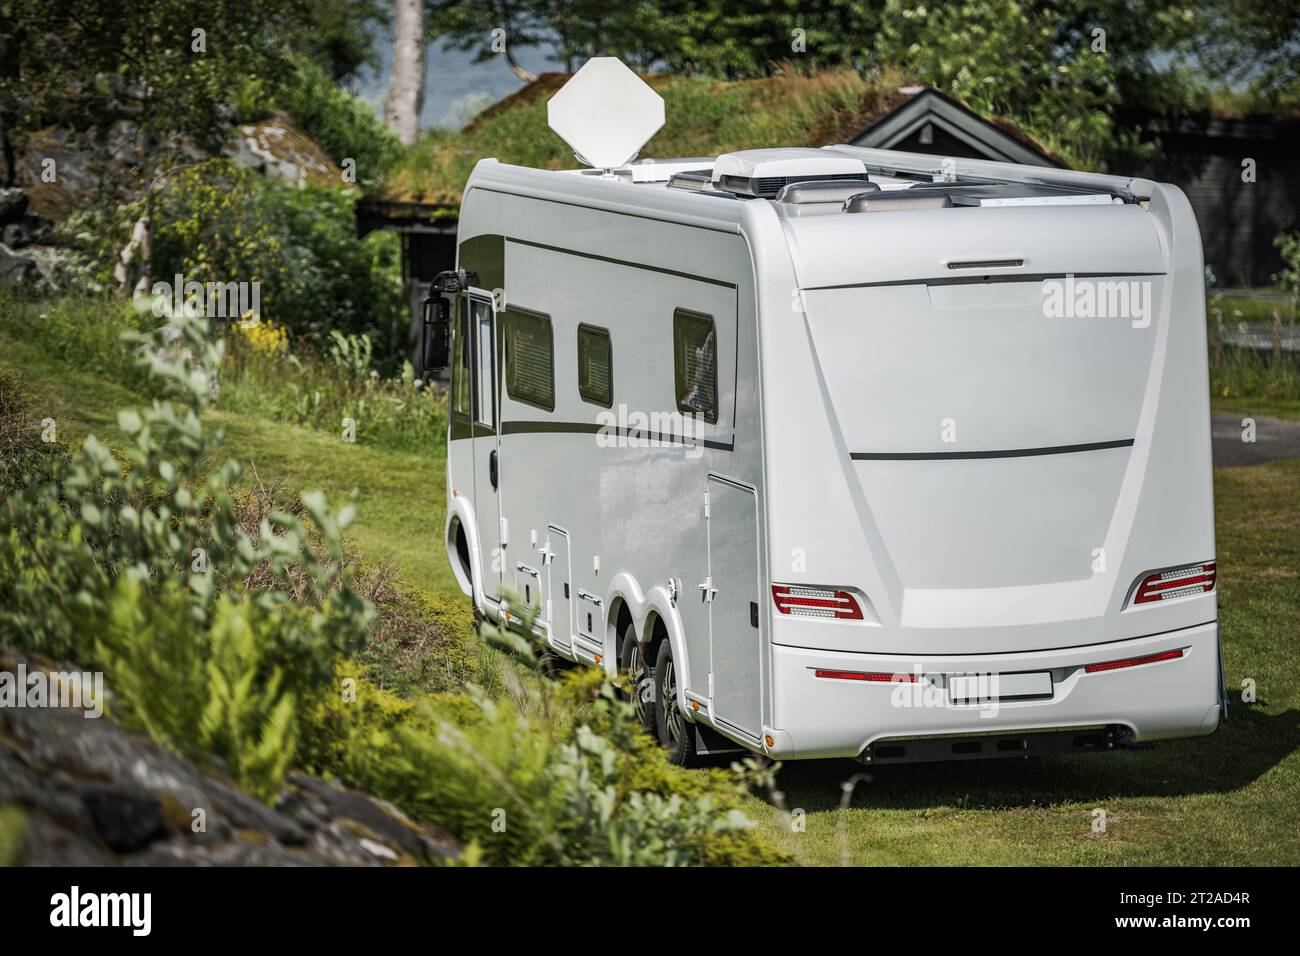 Modern Three Axle Full Size Full Integral Camper Van with Satellite Dish on the Roof Stock Photo